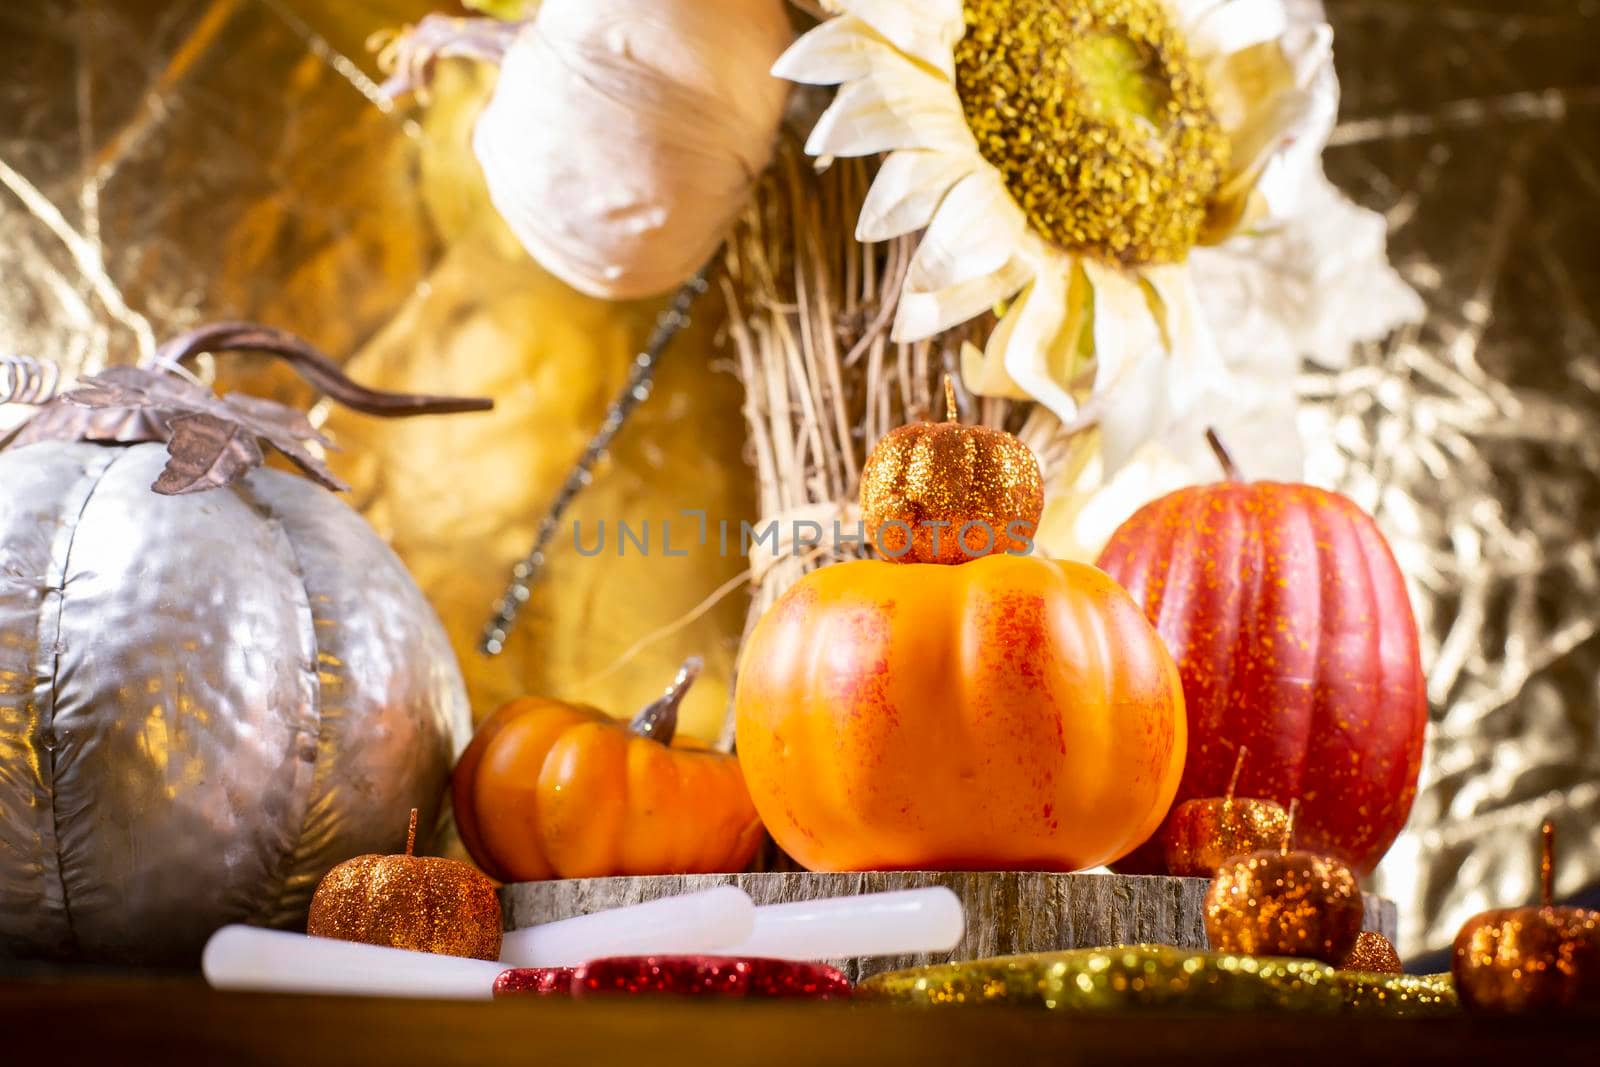 Small orange pumpkins, small red pumpkin, small orange glitter pumpkins, a large silver pumpkin, red, yellow, and orange glitter leaves, and dried sunflowers against a golden background